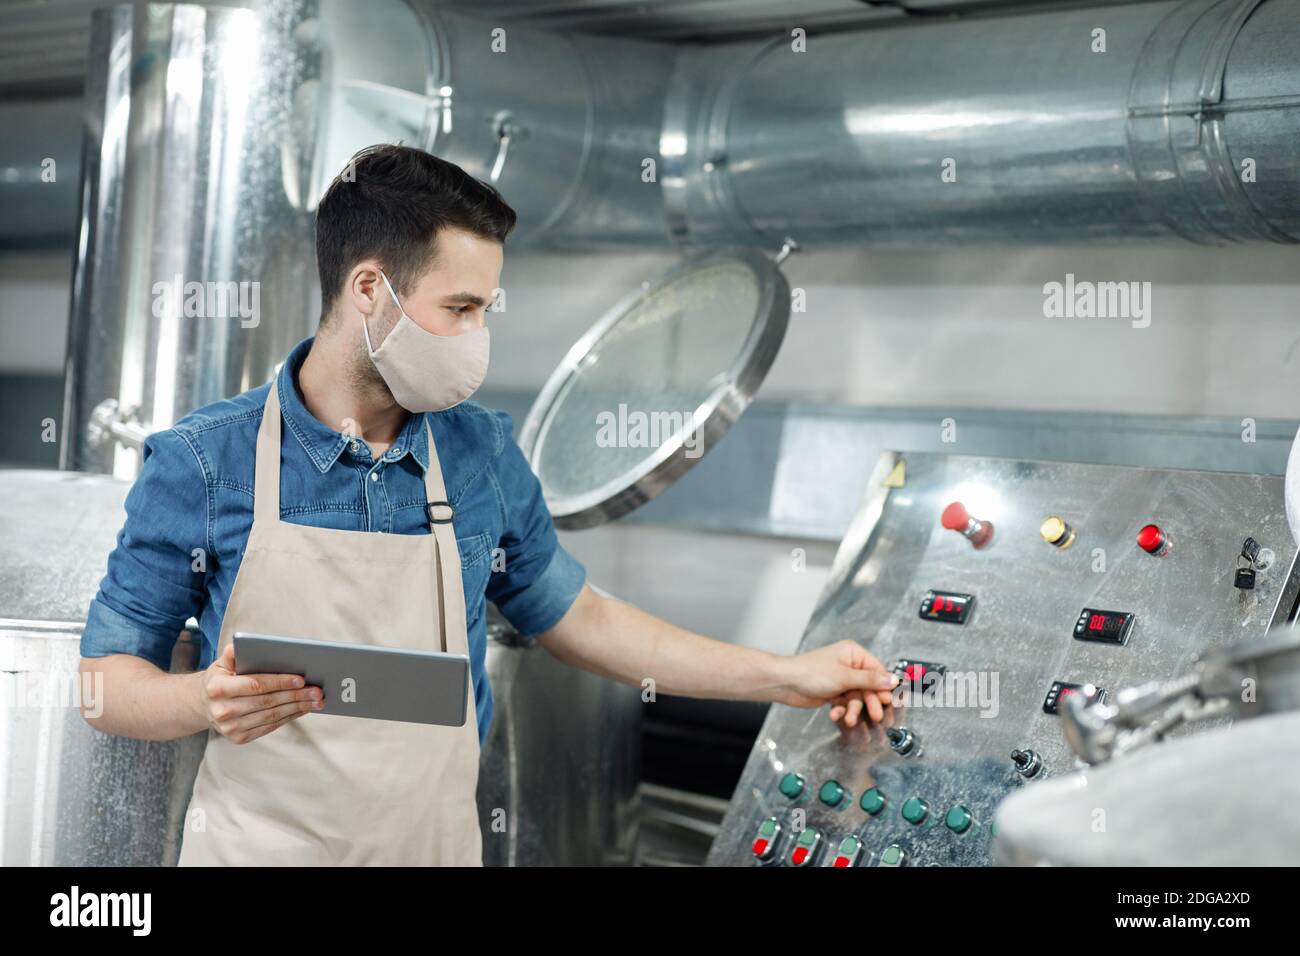 Management of large brewery during social distancing Stock Photo